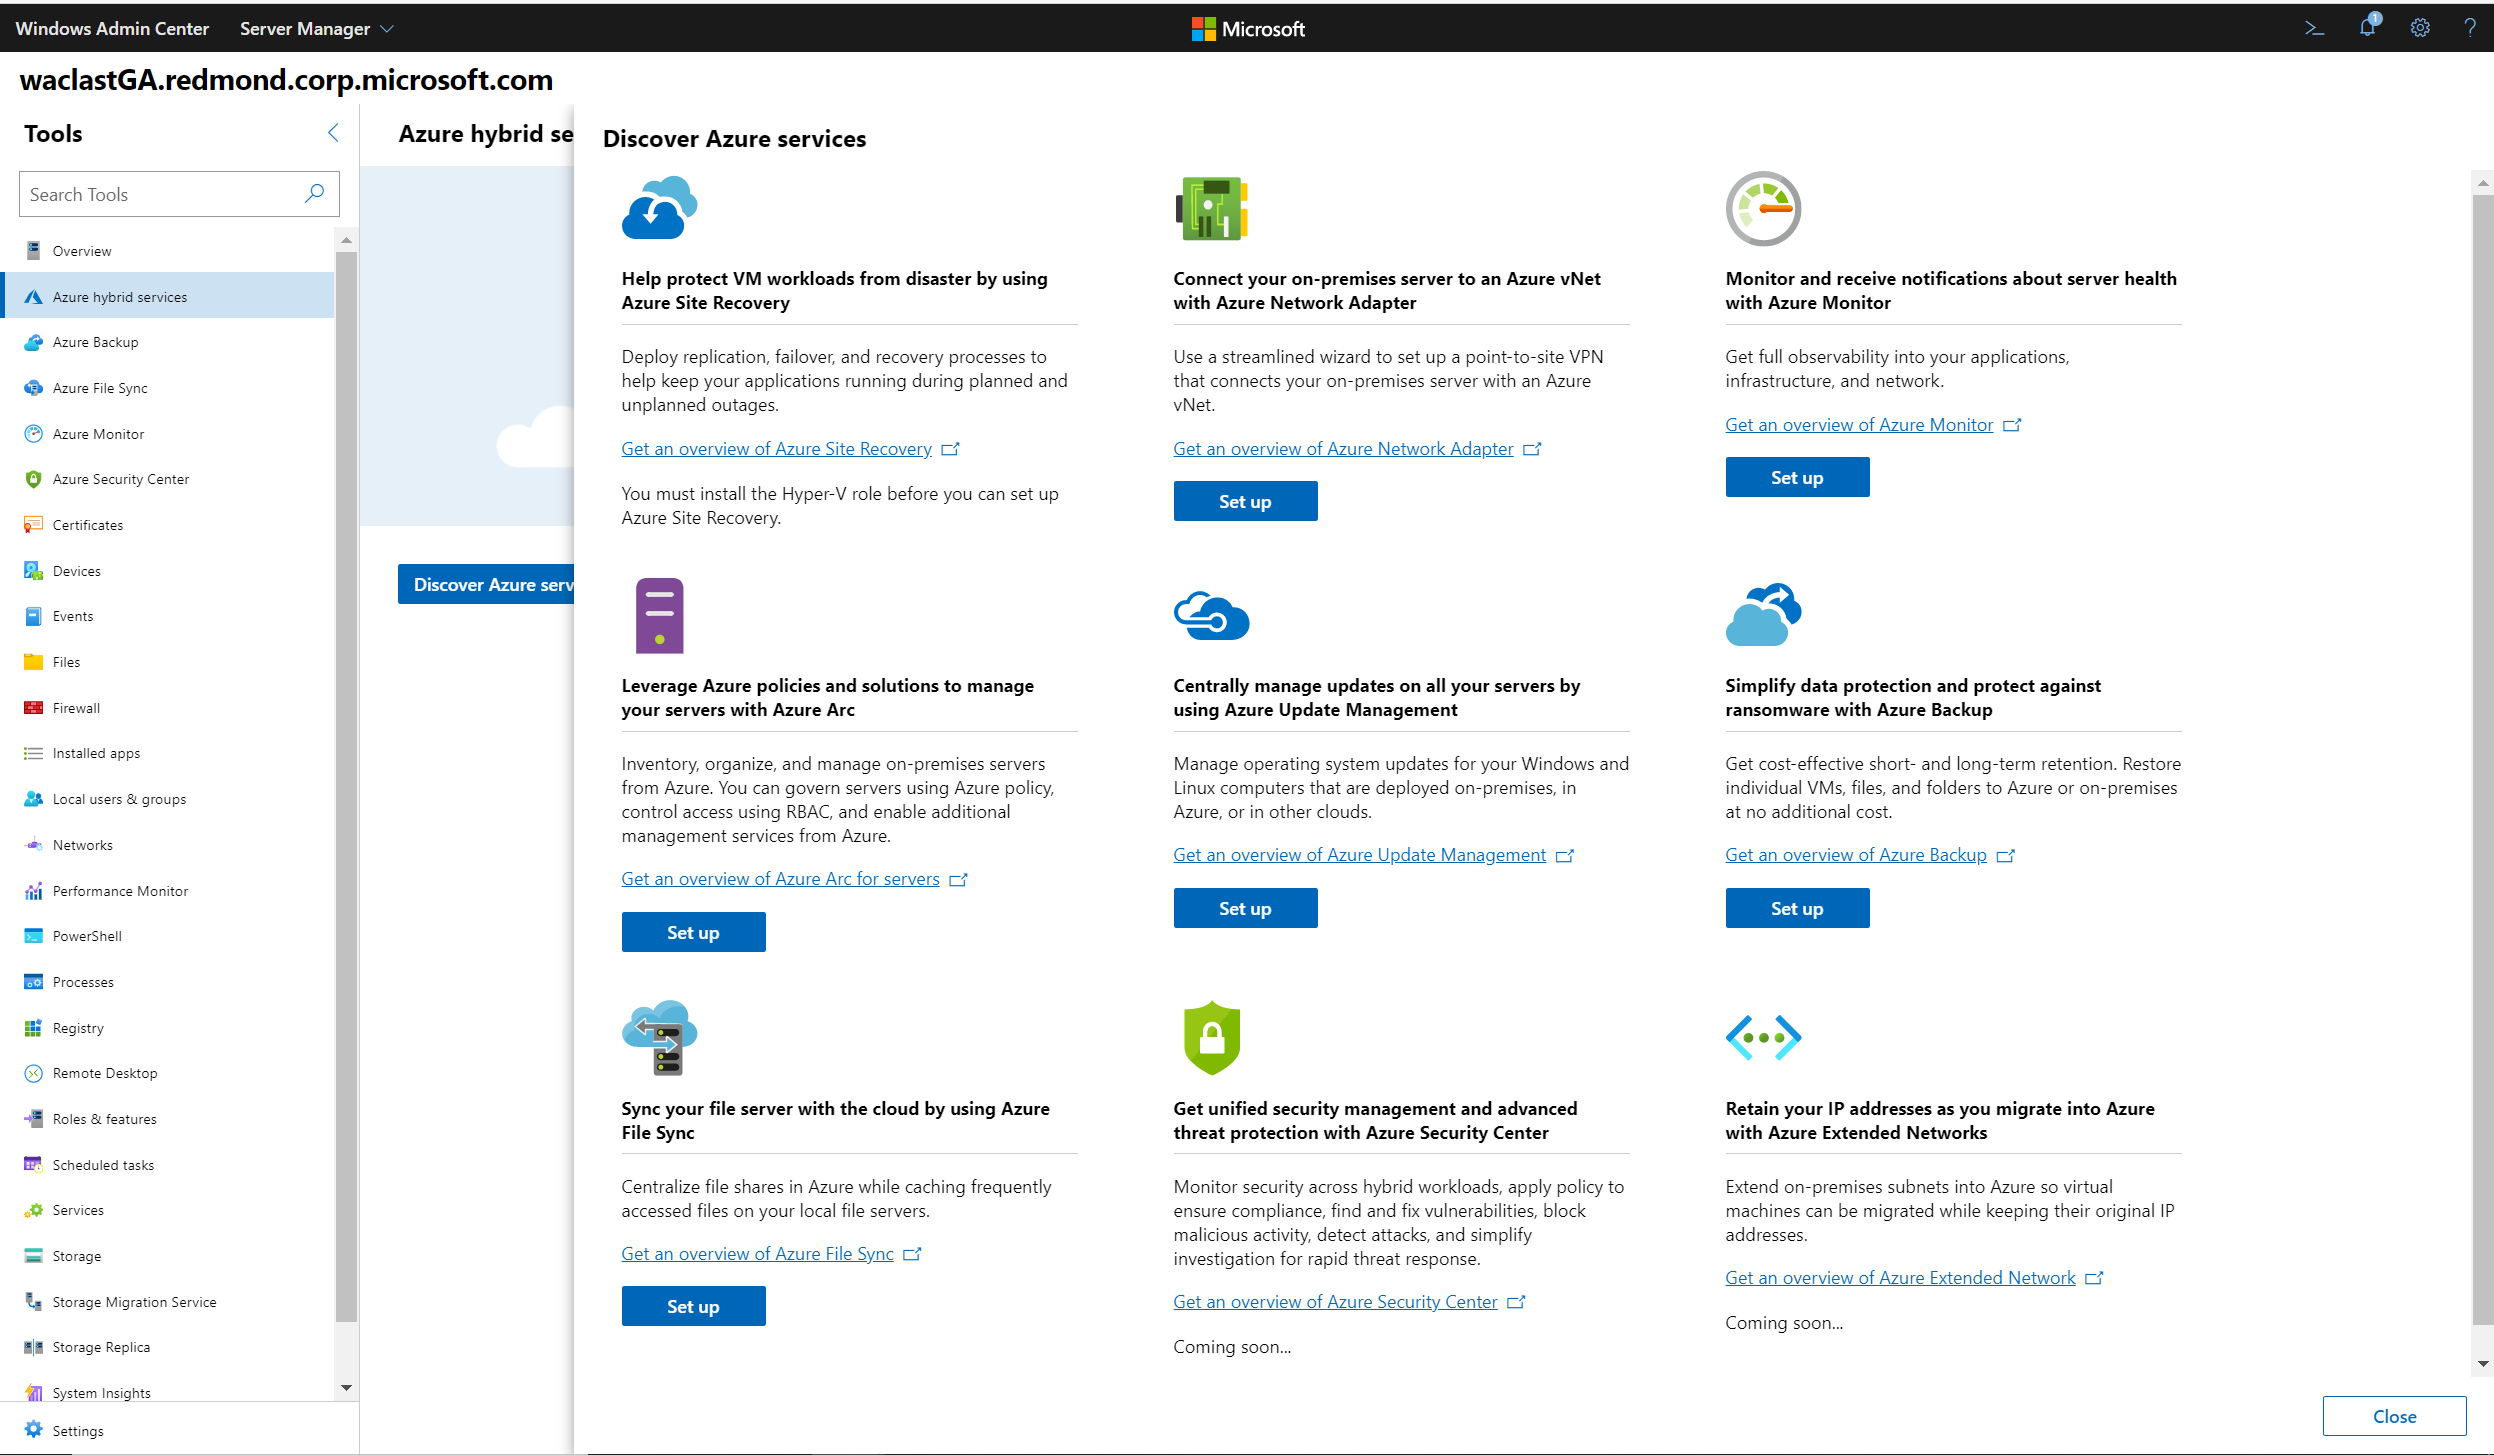 Screenshot of Windows Admin Center showing the Azure Hybrid Services tool